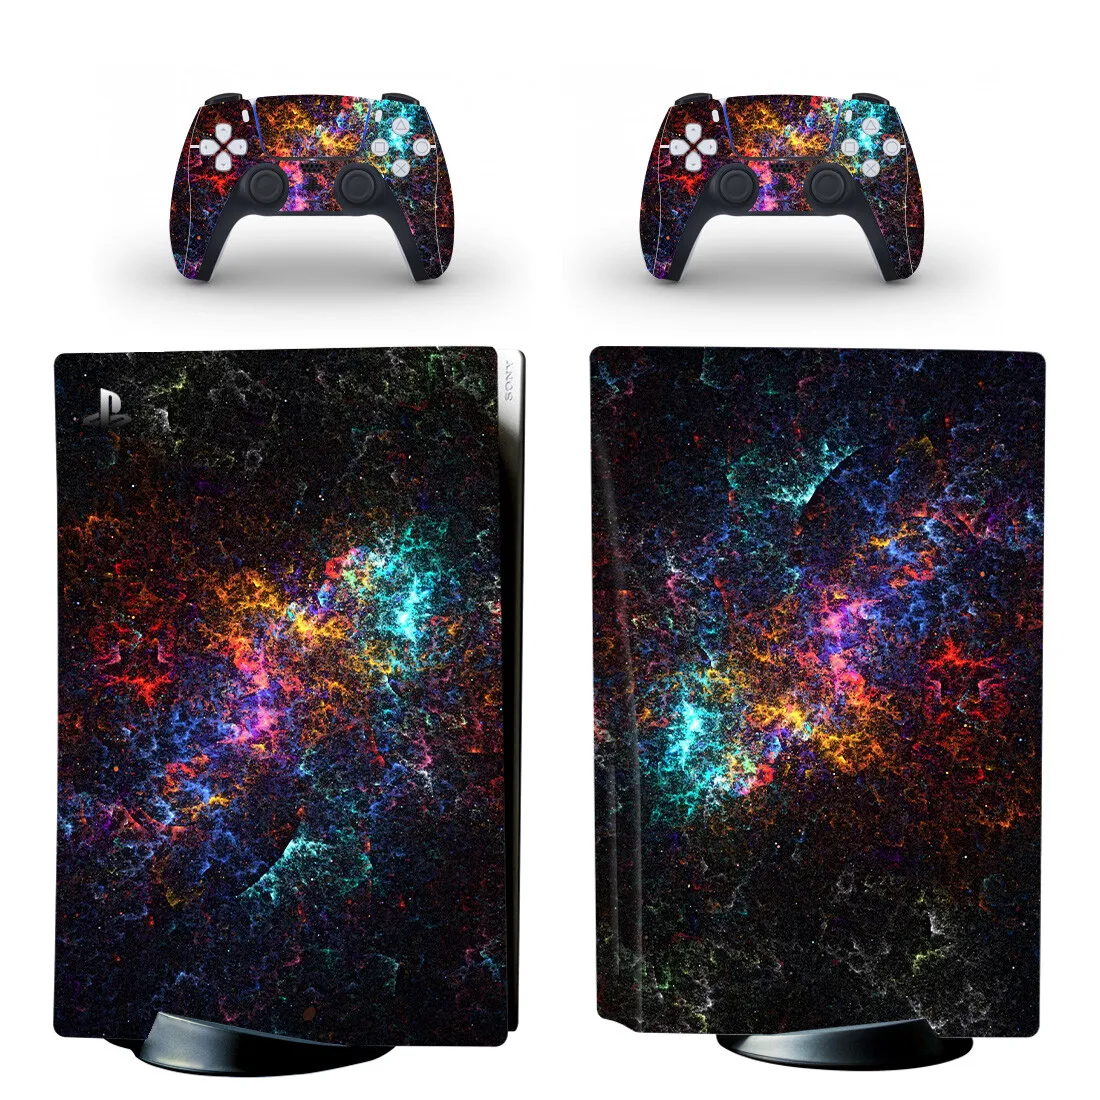 

Starry Sky Cloud PS5 Disc Skin Sticker Cover for Playstation 5 Console & 2 Controllers Decal Vinyl Protective Disk Skins